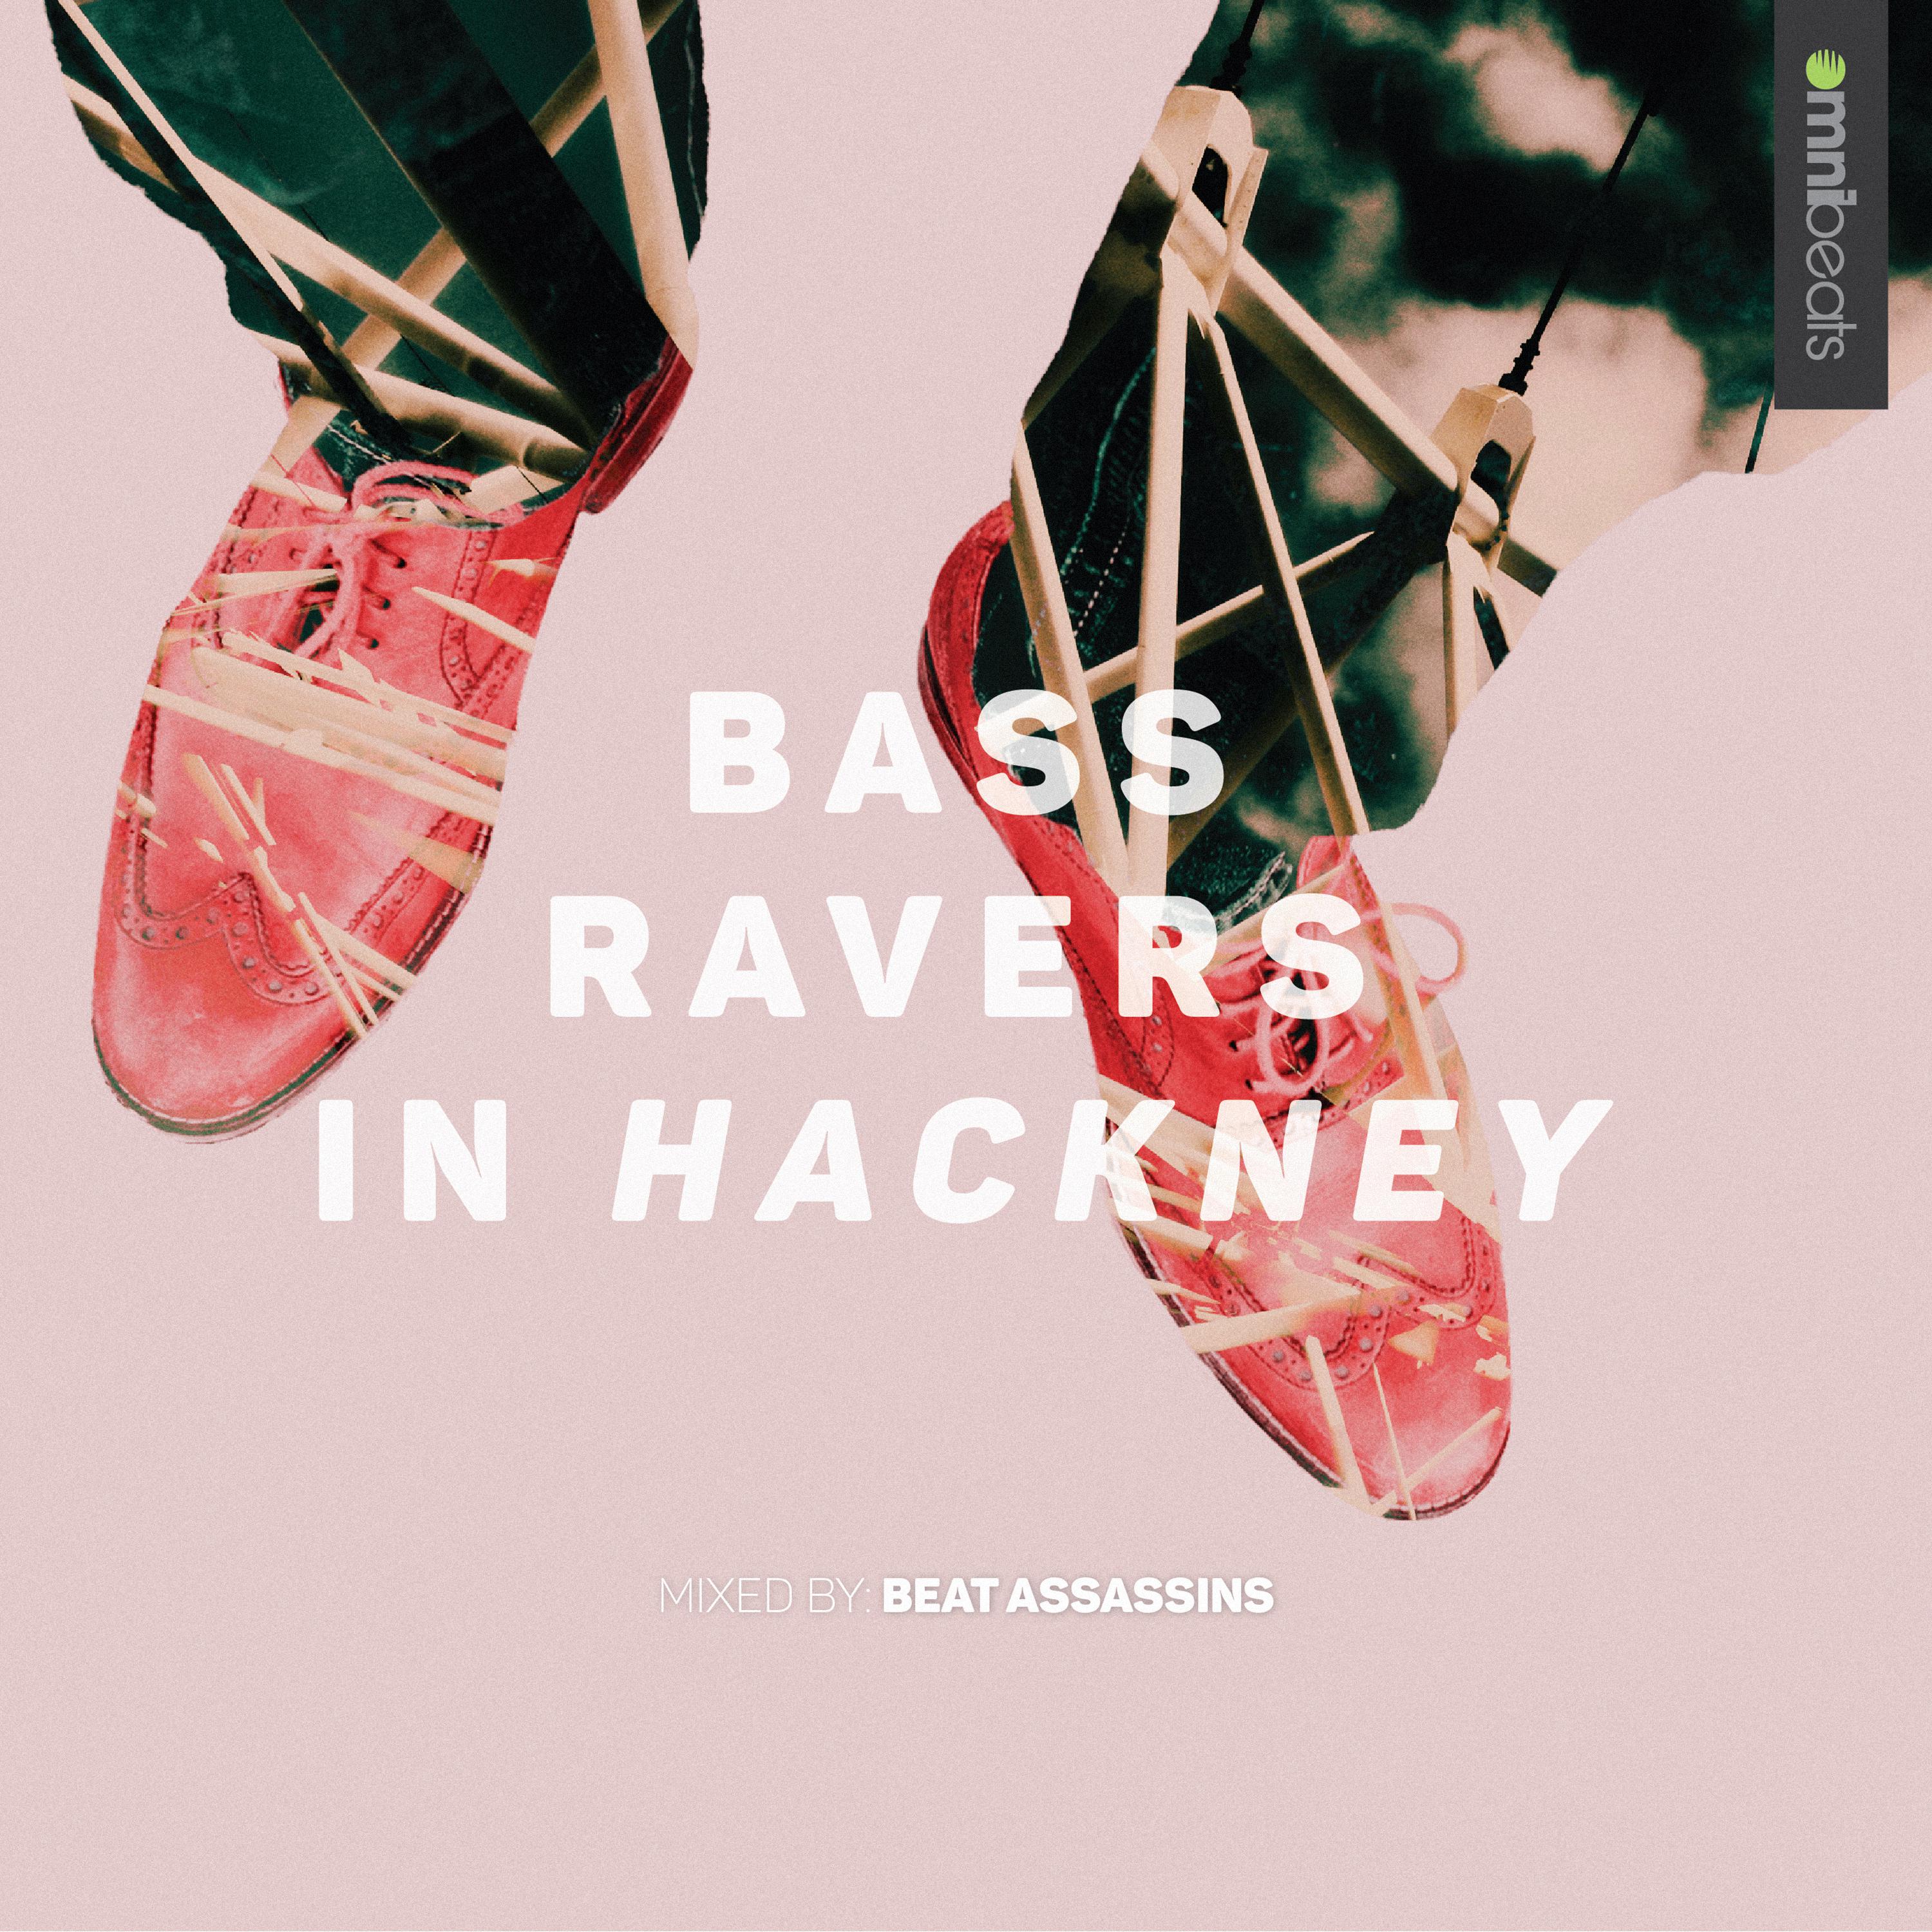 Beat Assassins - Bass Ravers In Hackney (Continuous Mix)